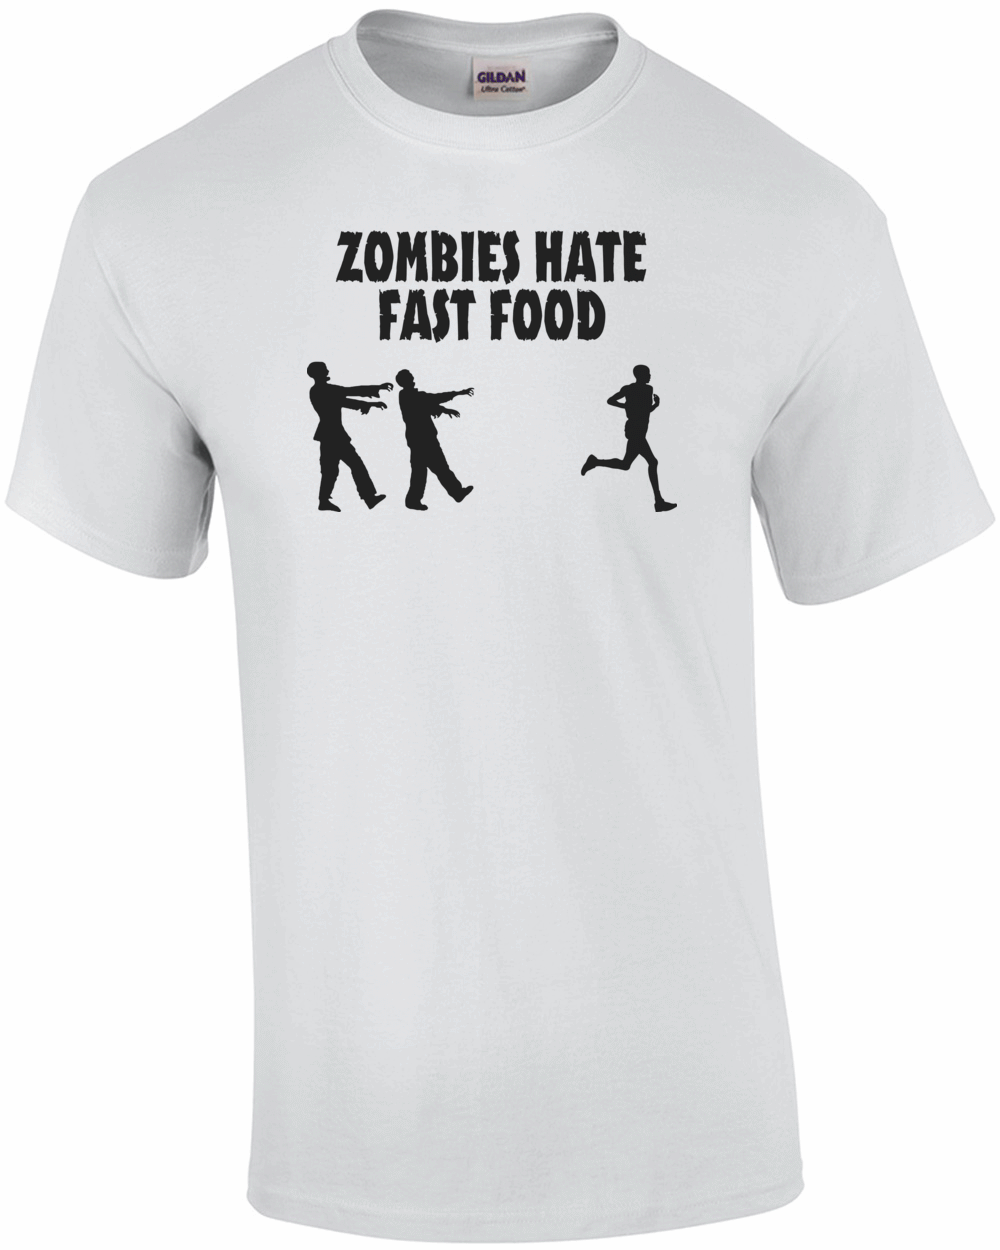 Zombies Hate Fast Food Funny Tshirt